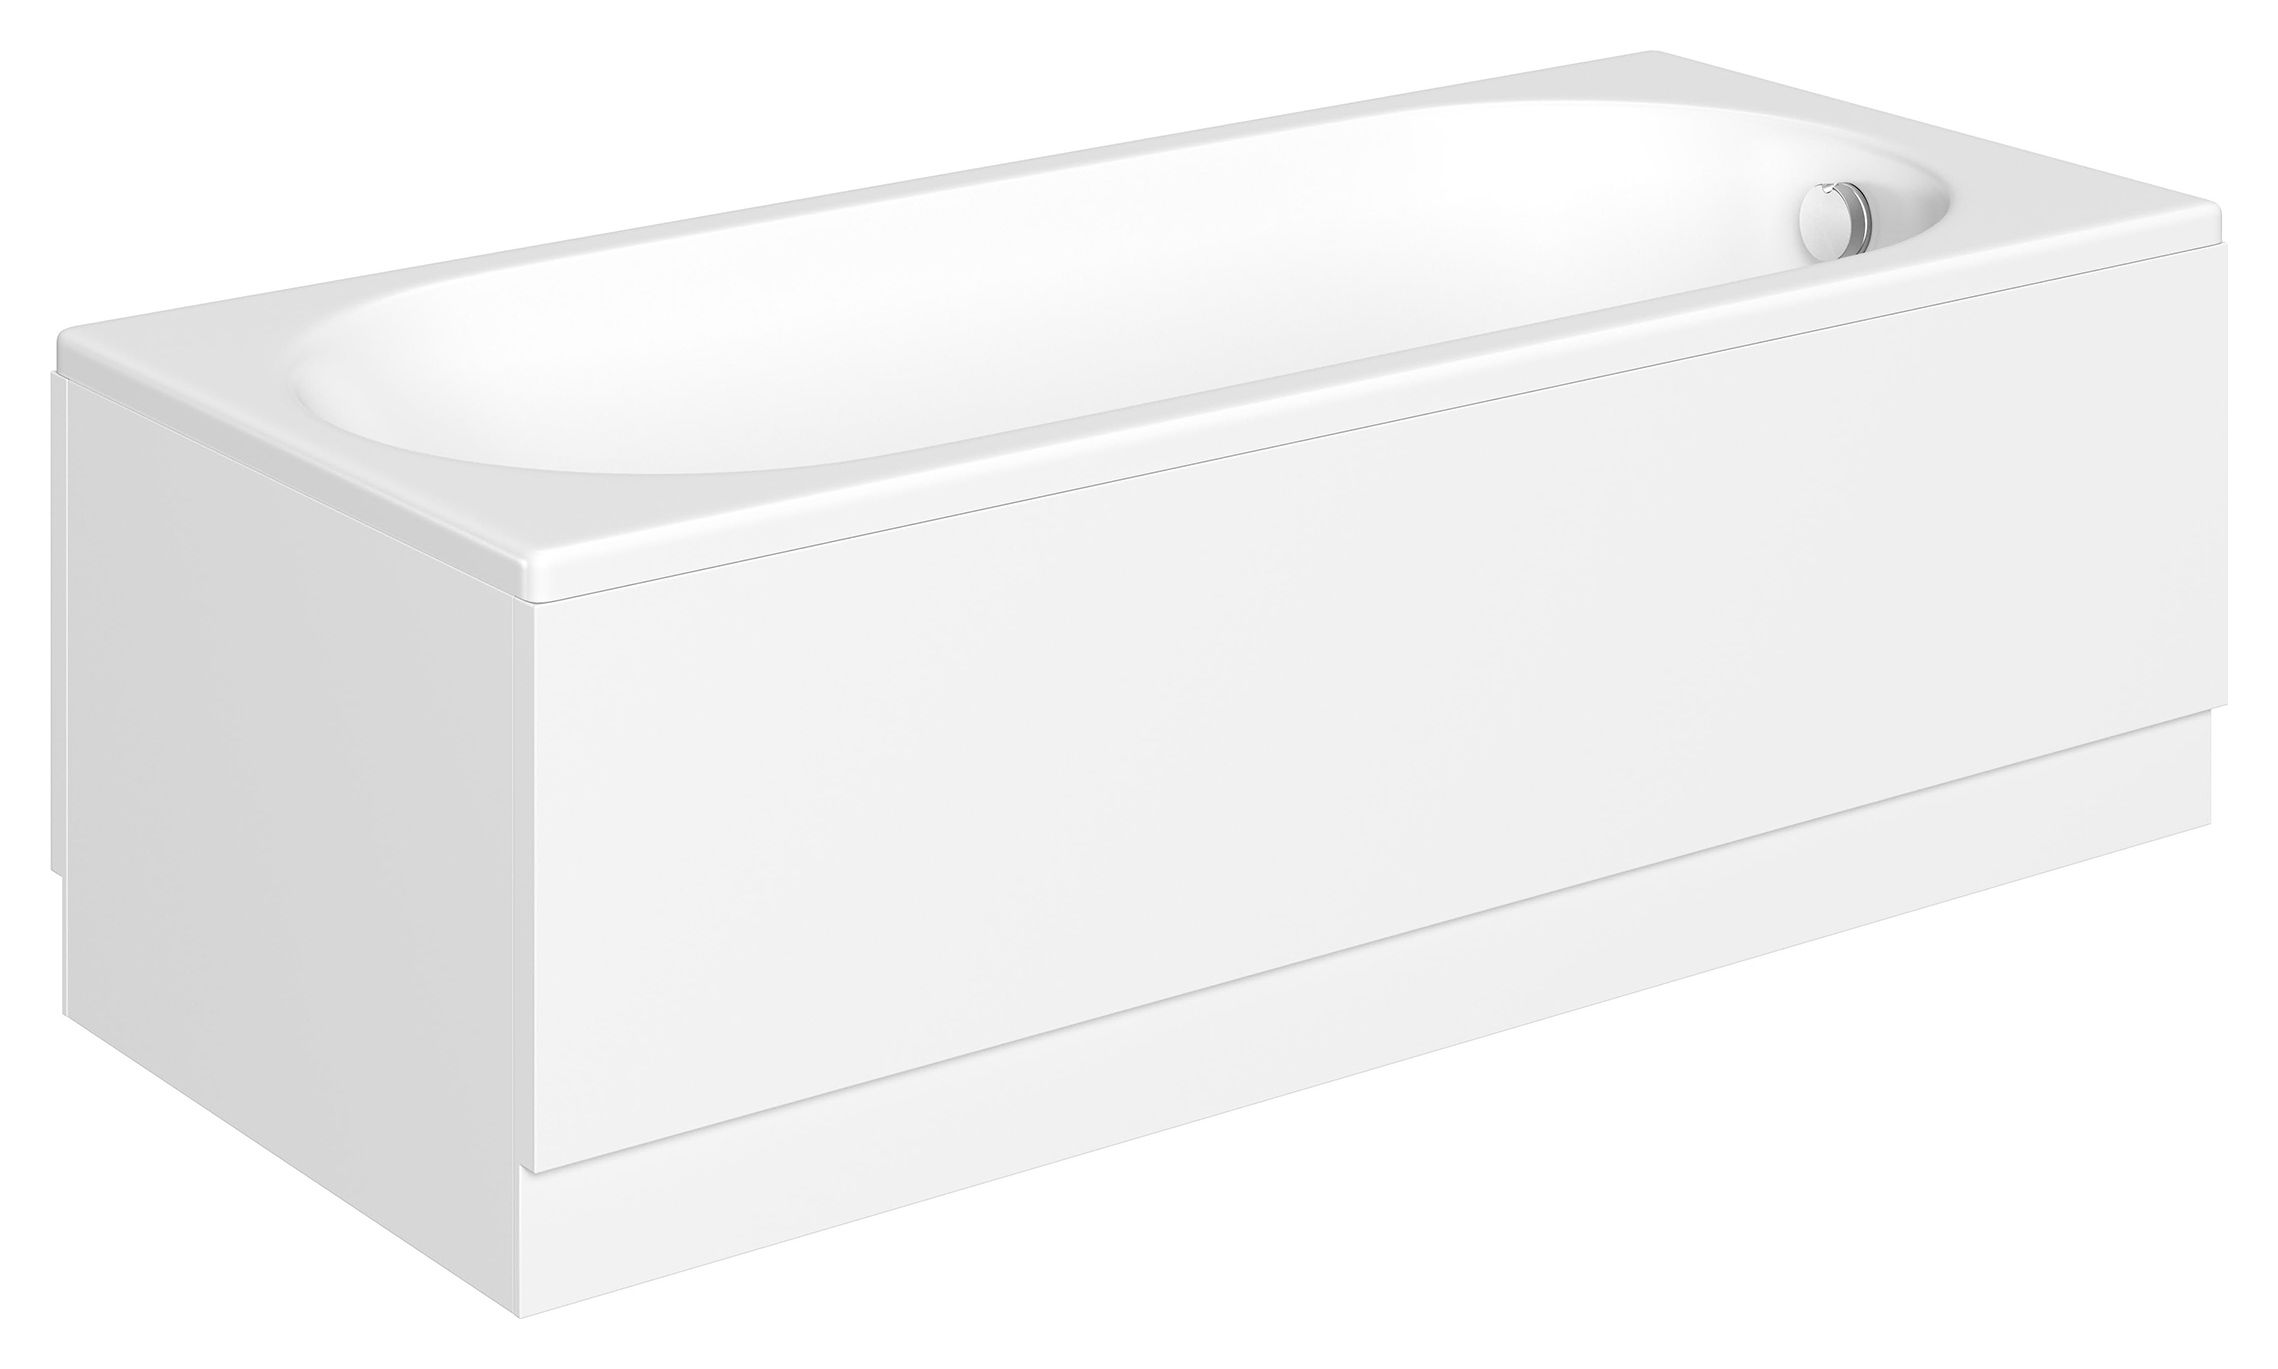 Wickes Forenza Double Ended Bath - 1800 x 800mm